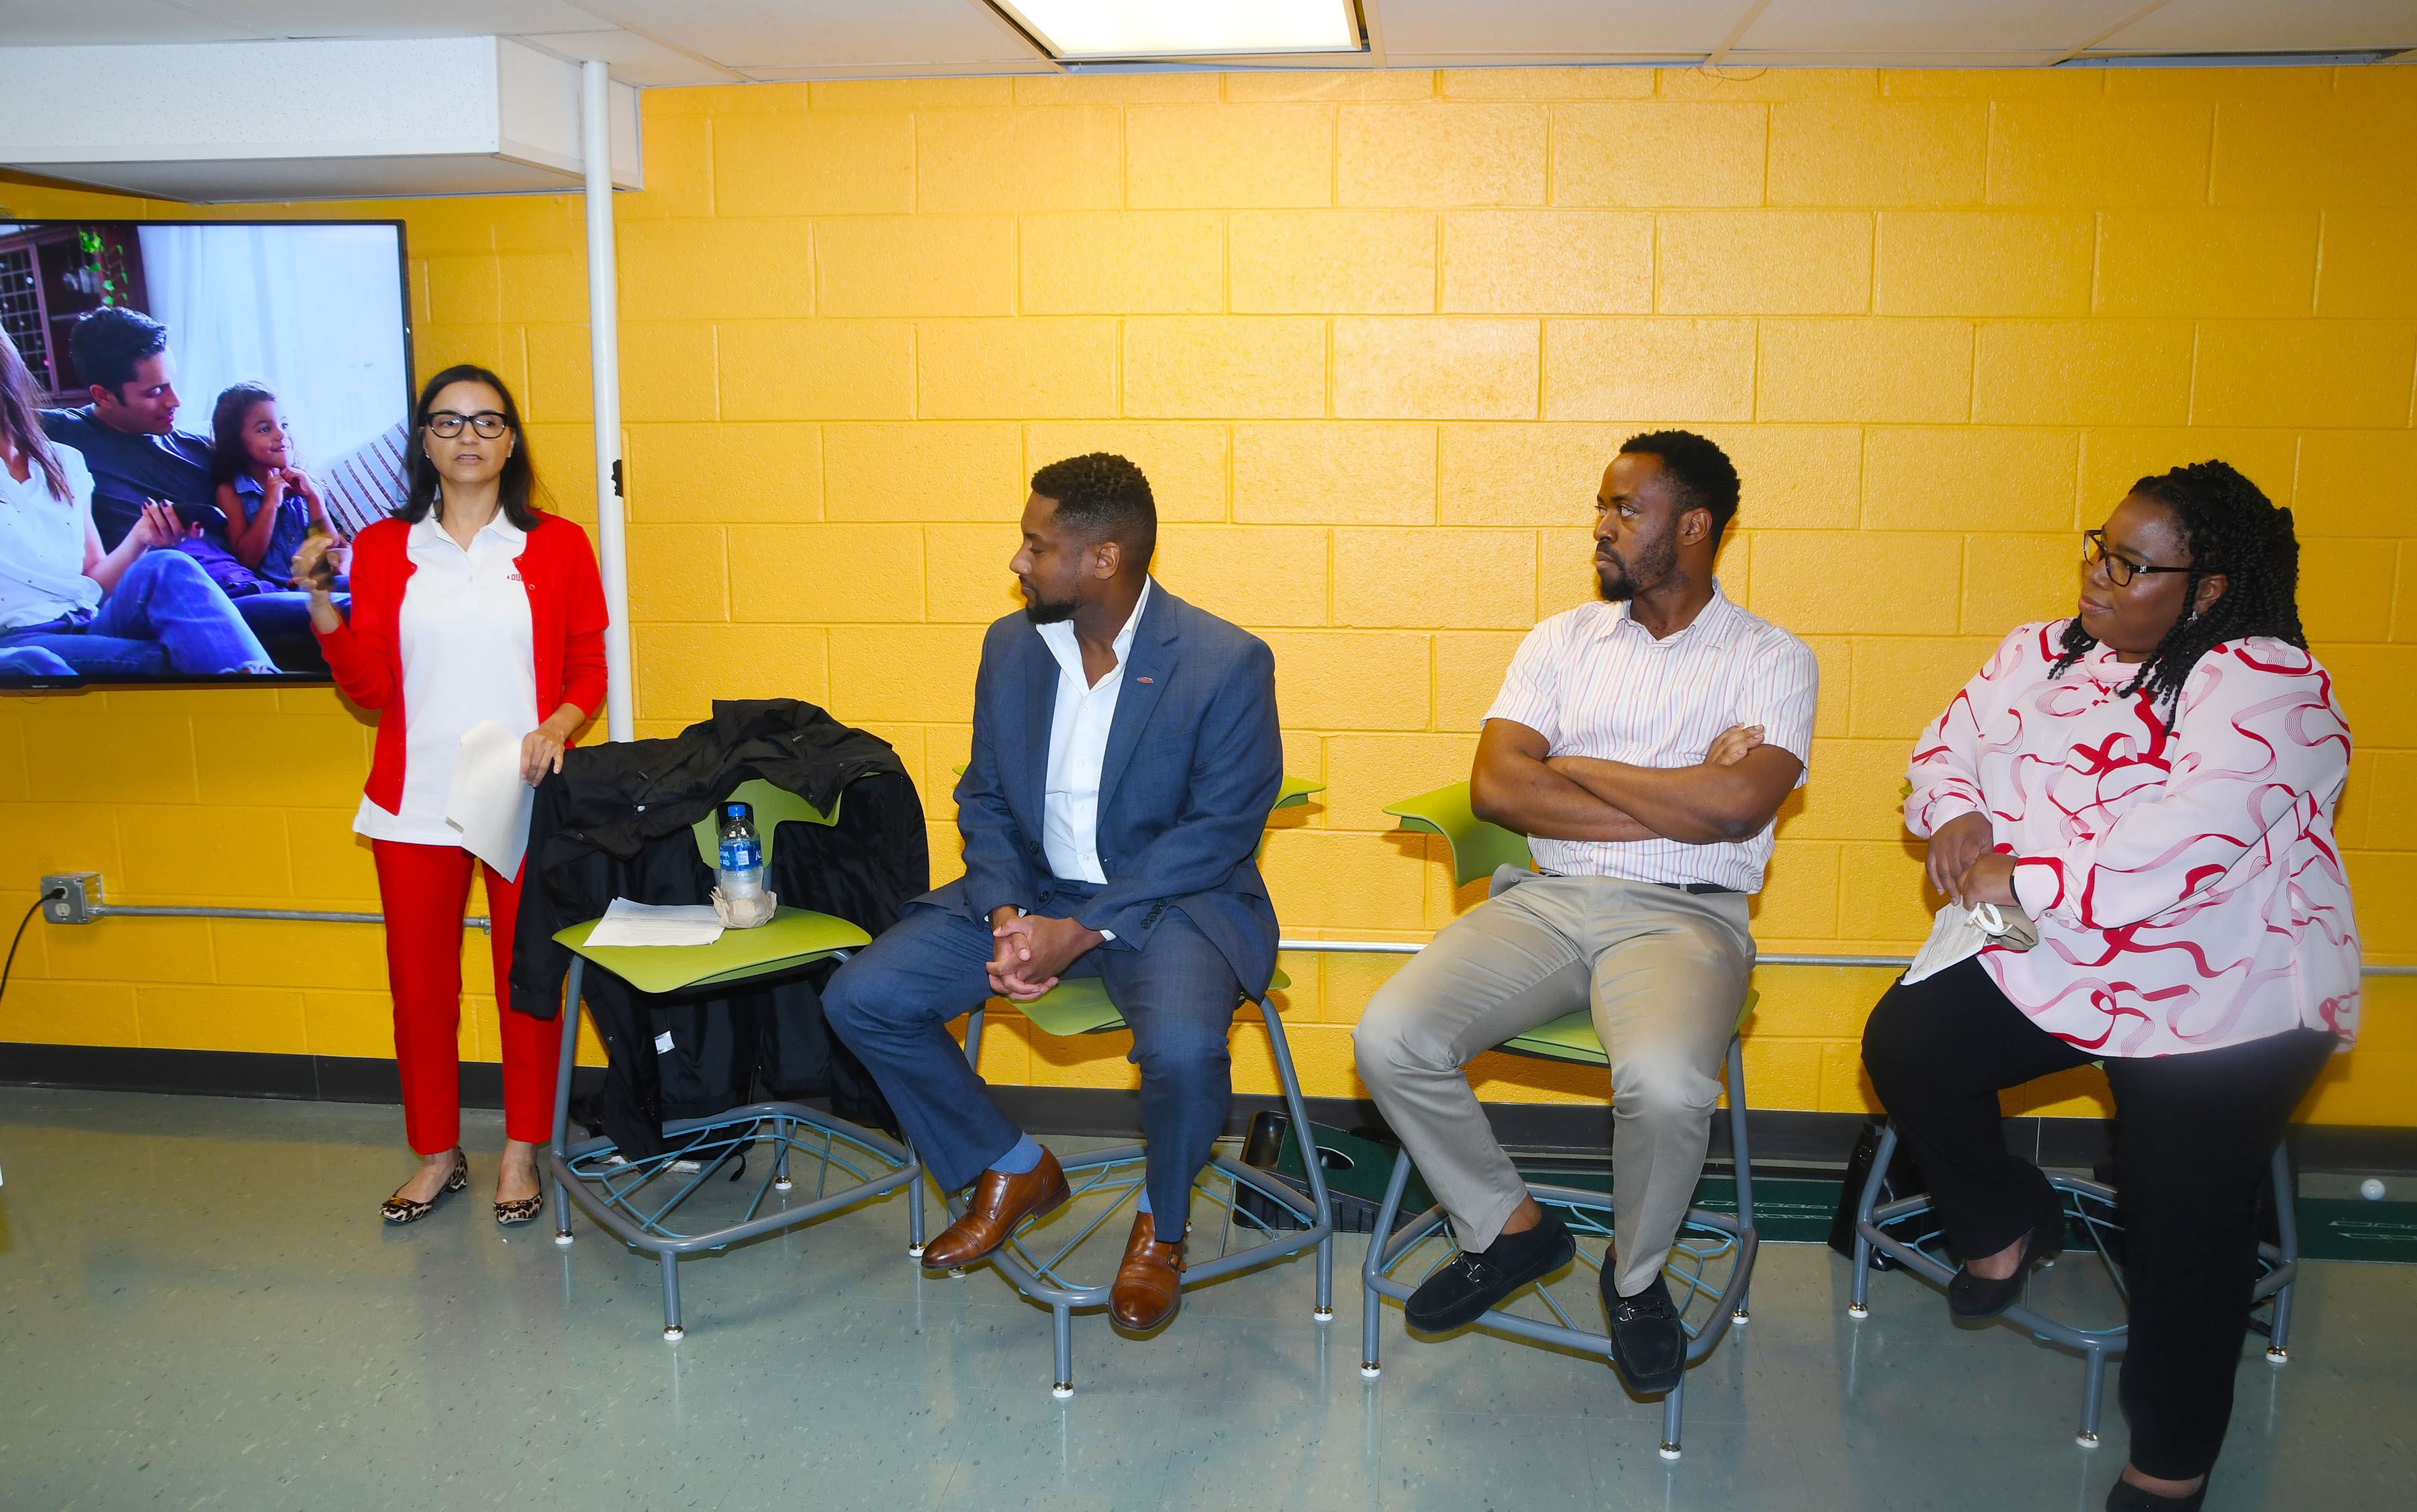 (L-r) DuPont's Maria Prince, Ben Whitney, Berlin Stokes and Chideraa Nwachukwu enlighten students about future possibilities.